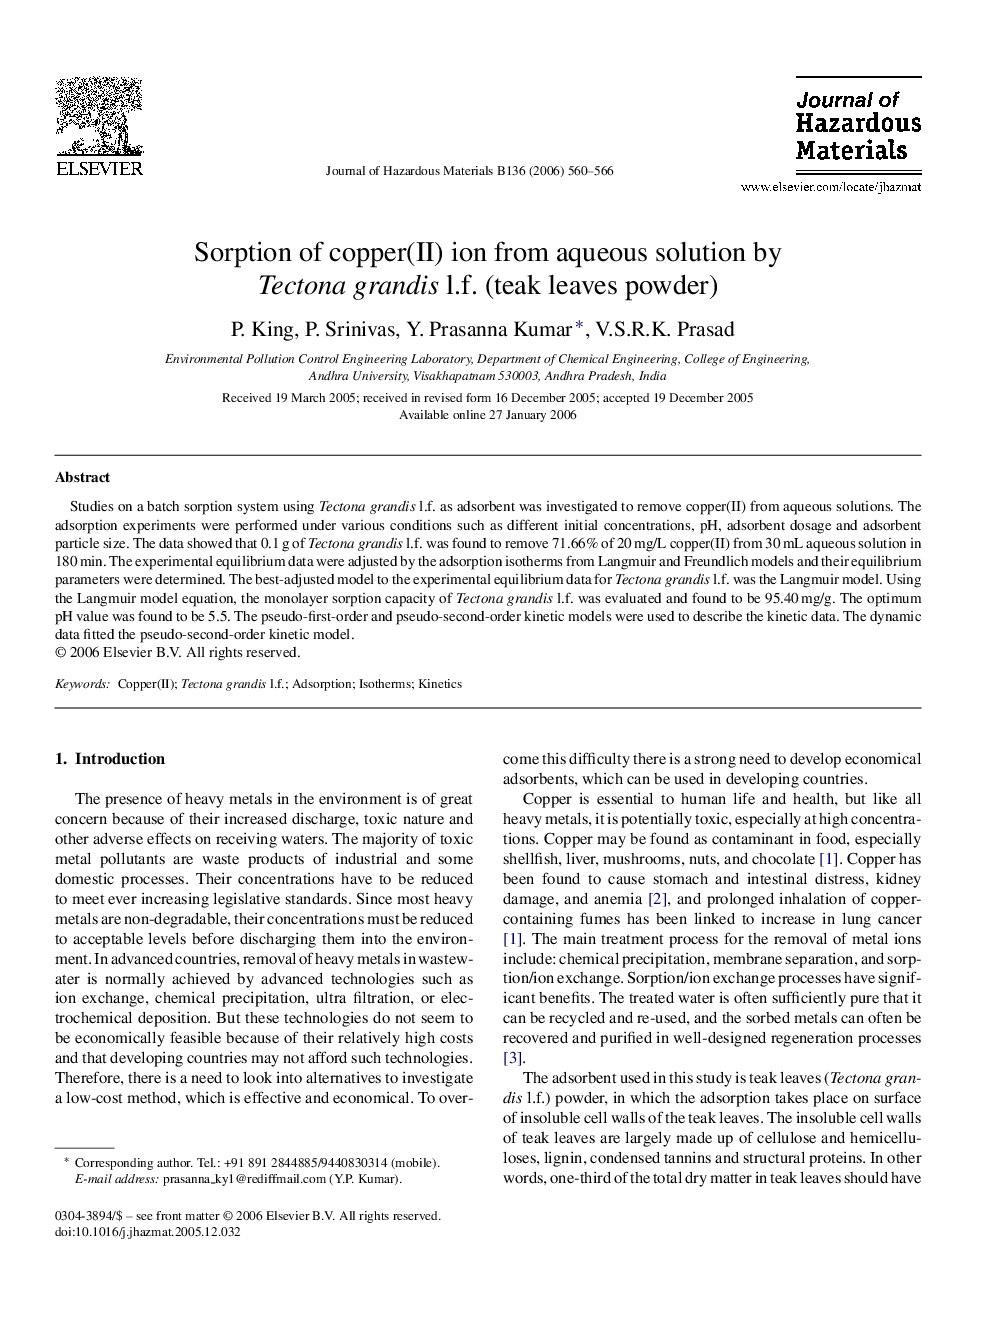 Sorption of copper(II) ion from aqueous solution by Tectona grandis l.f. (teak leaves powder)